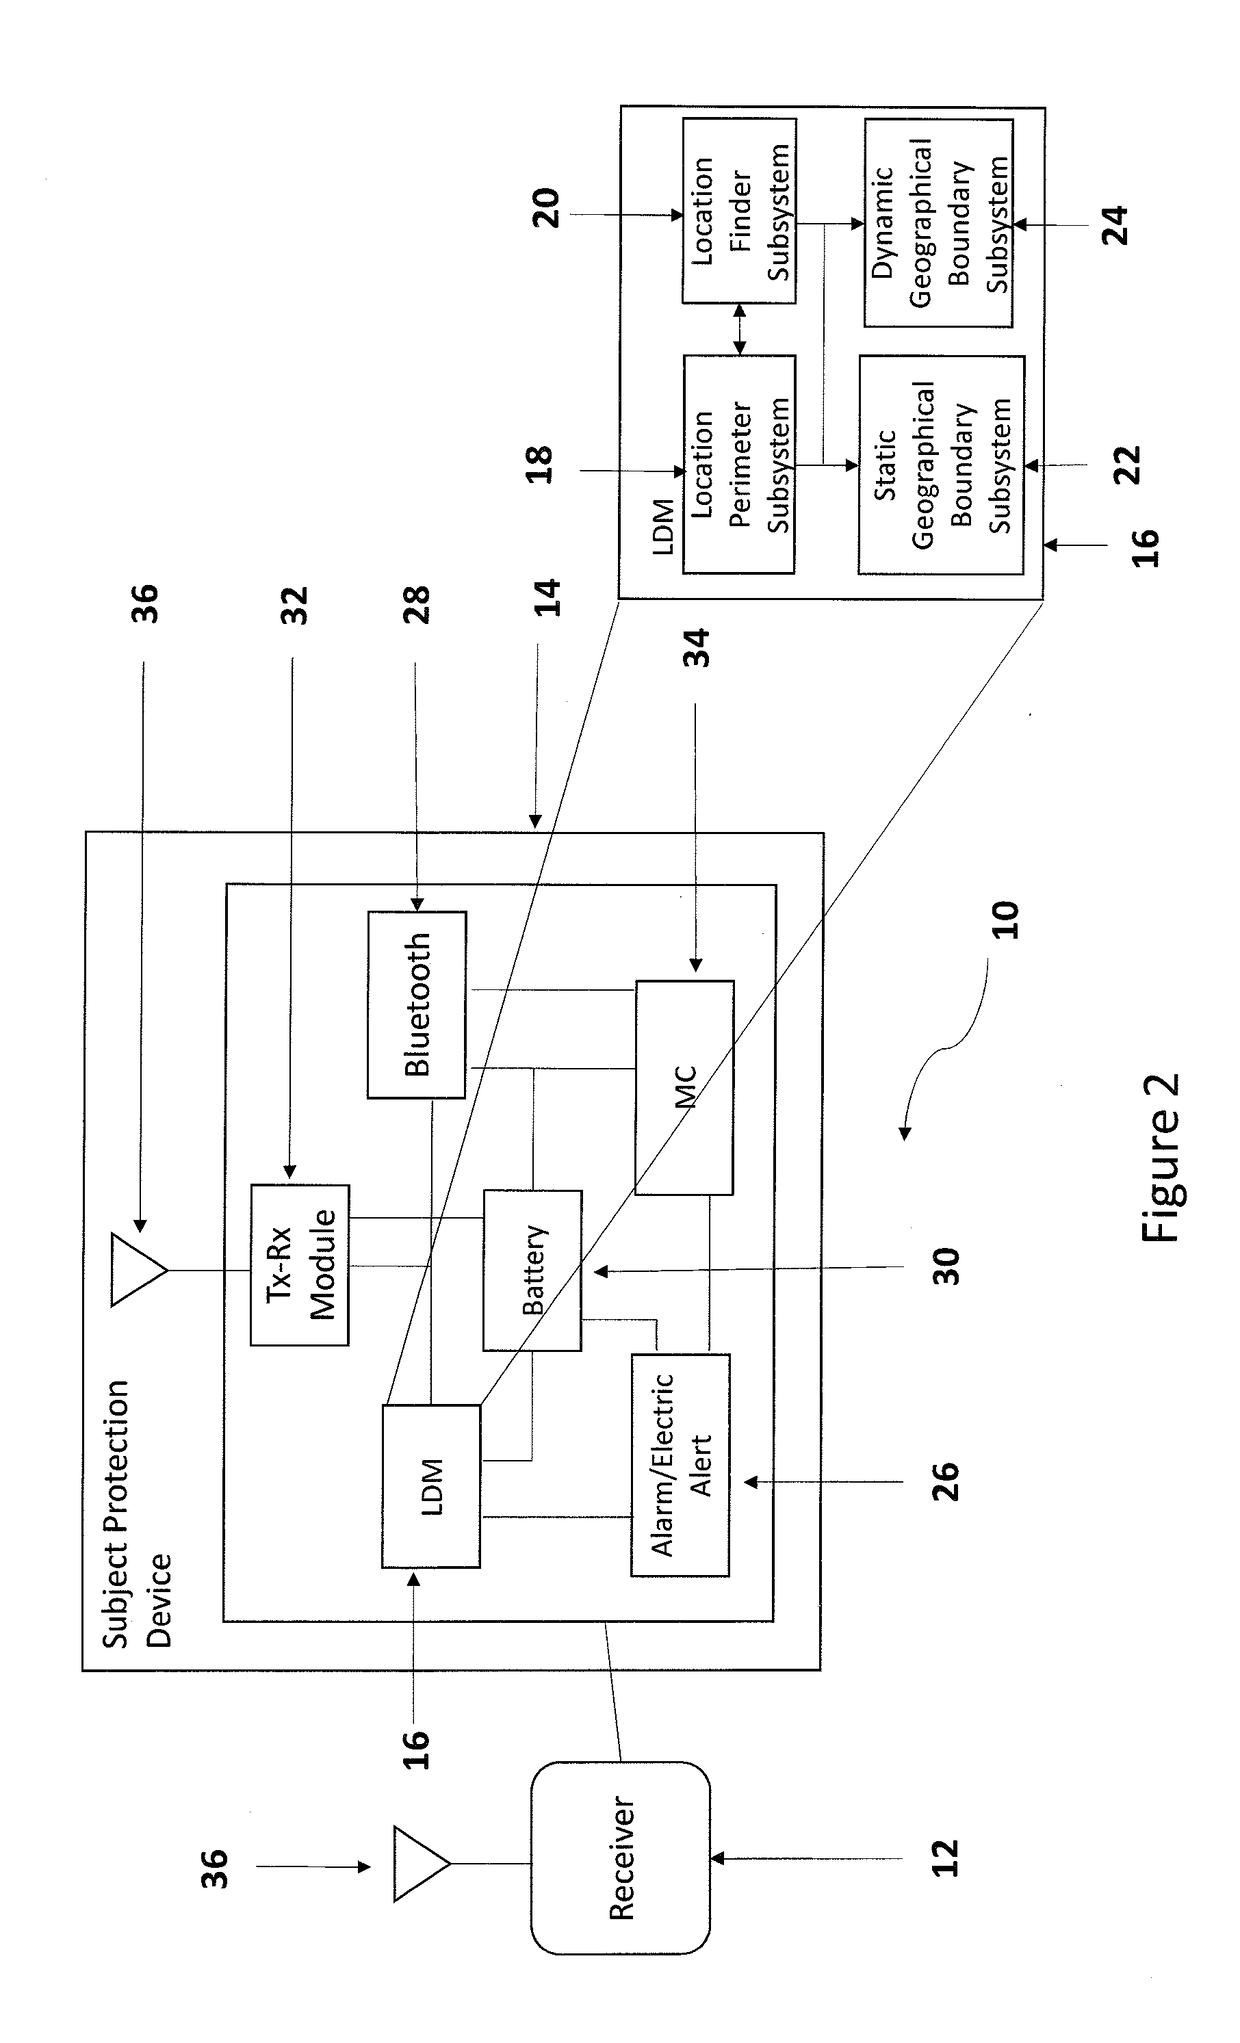 Method and system of pairing a receiving device to an external communications interface to create an enforceable dynamic boundary and geolocation system